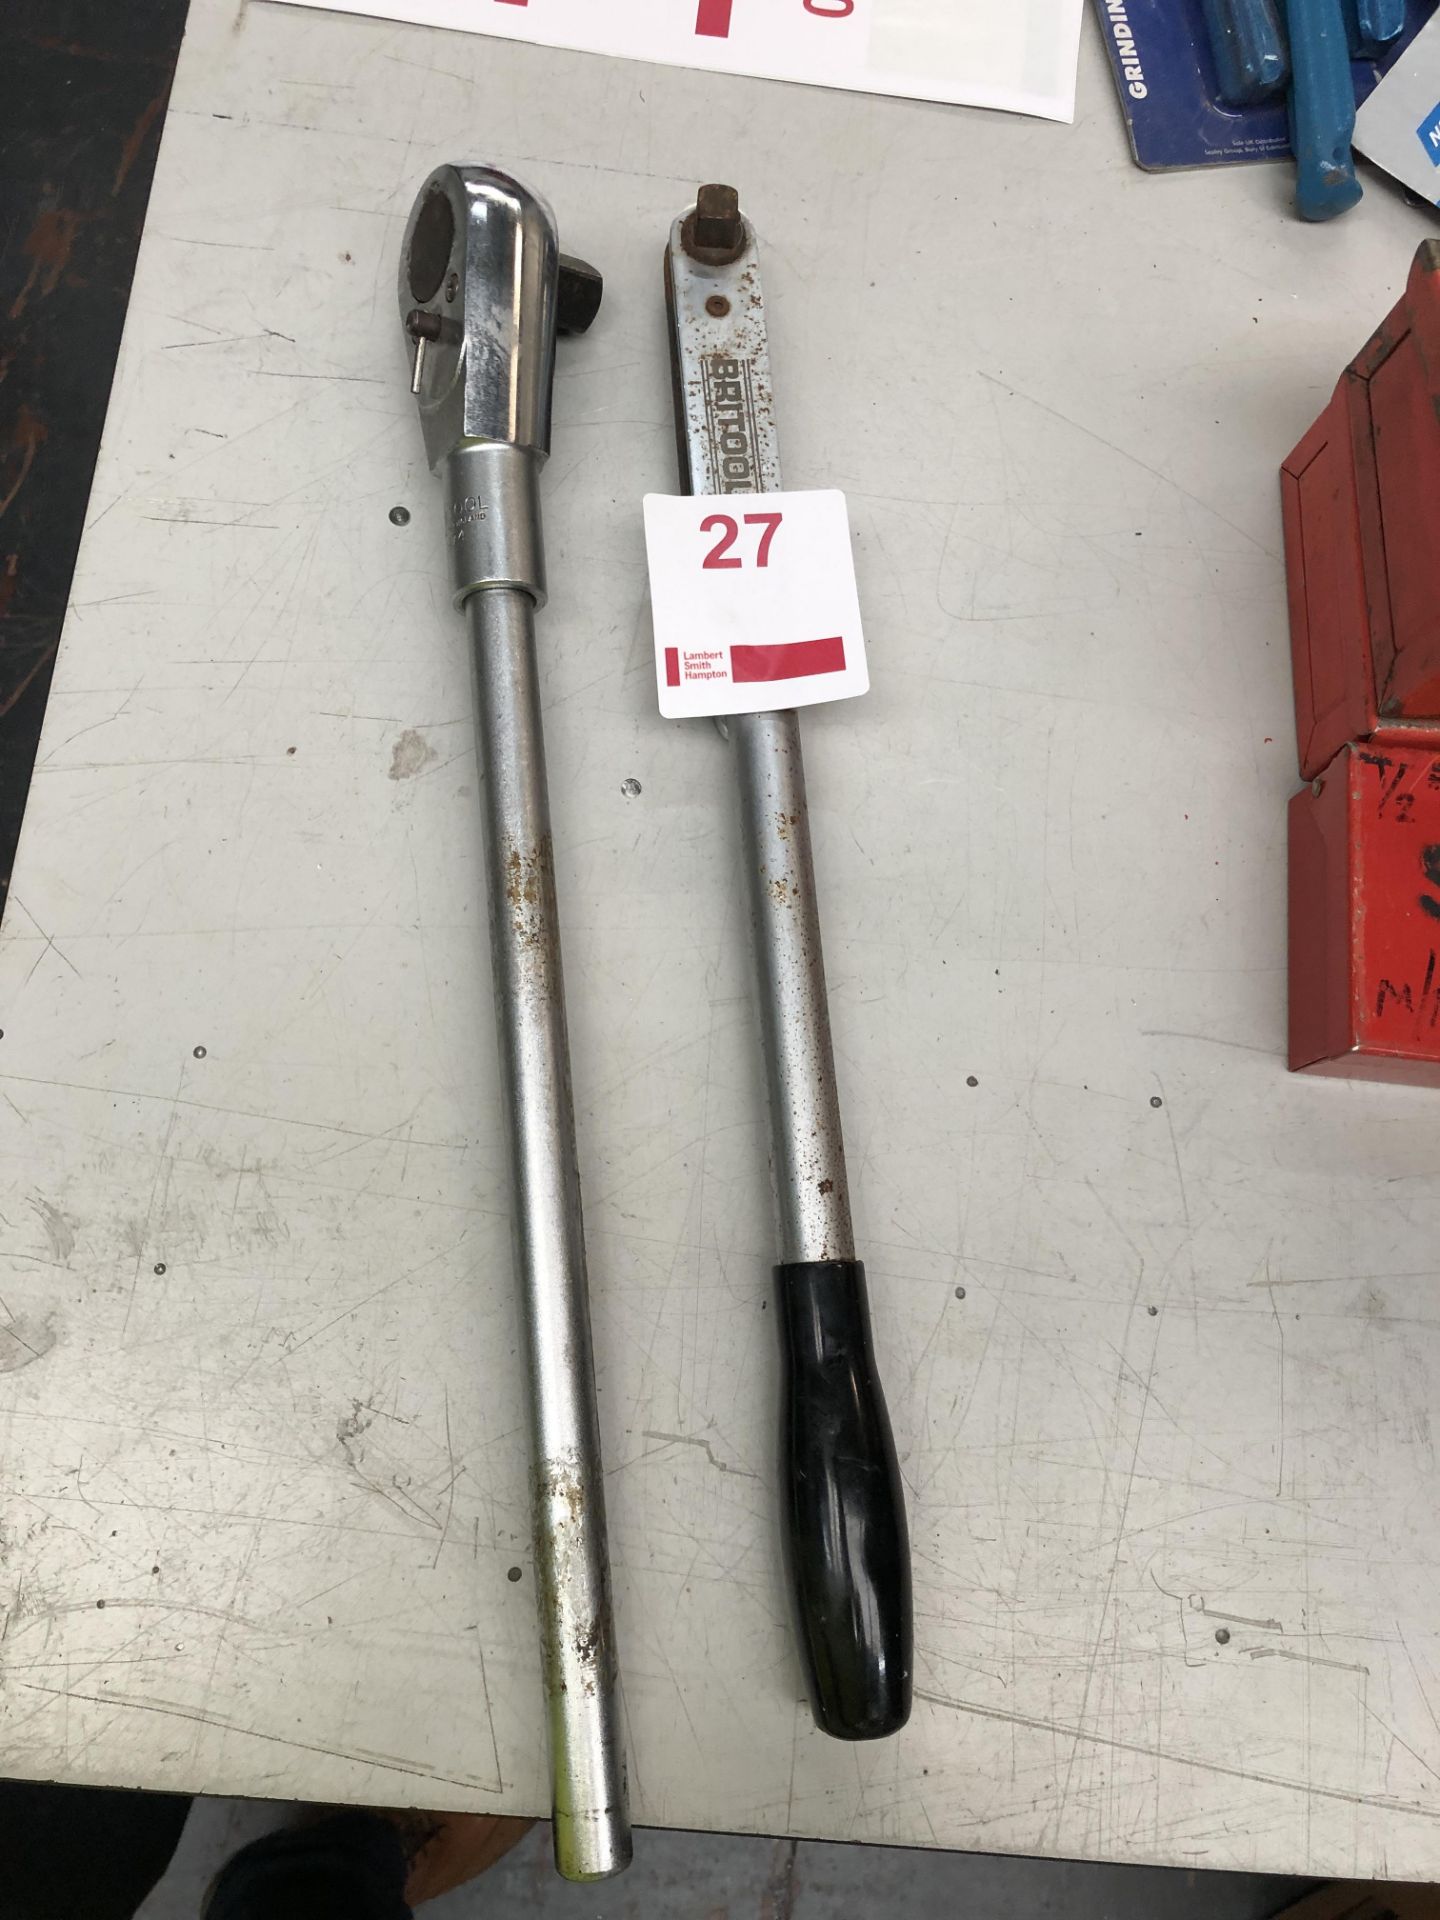 Britool 1/2" and 3/4" torque wrenches (Located Upminster)